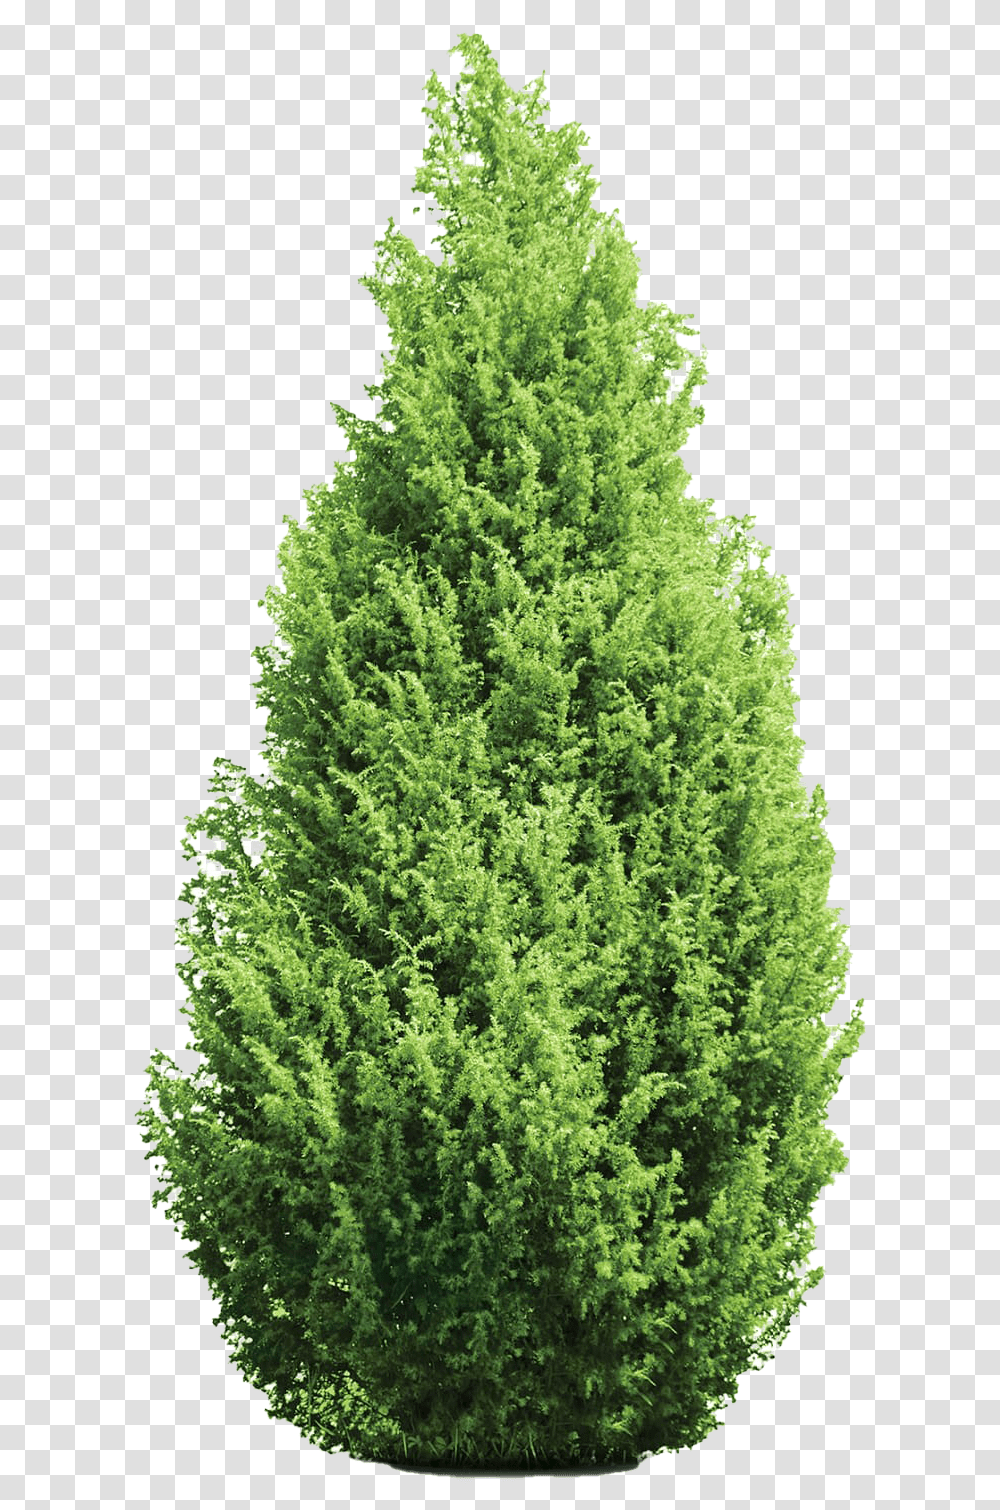 Evergreen Tree Background Cypress Tree, Plant, Conifer, Pine, Fir Transparent Png